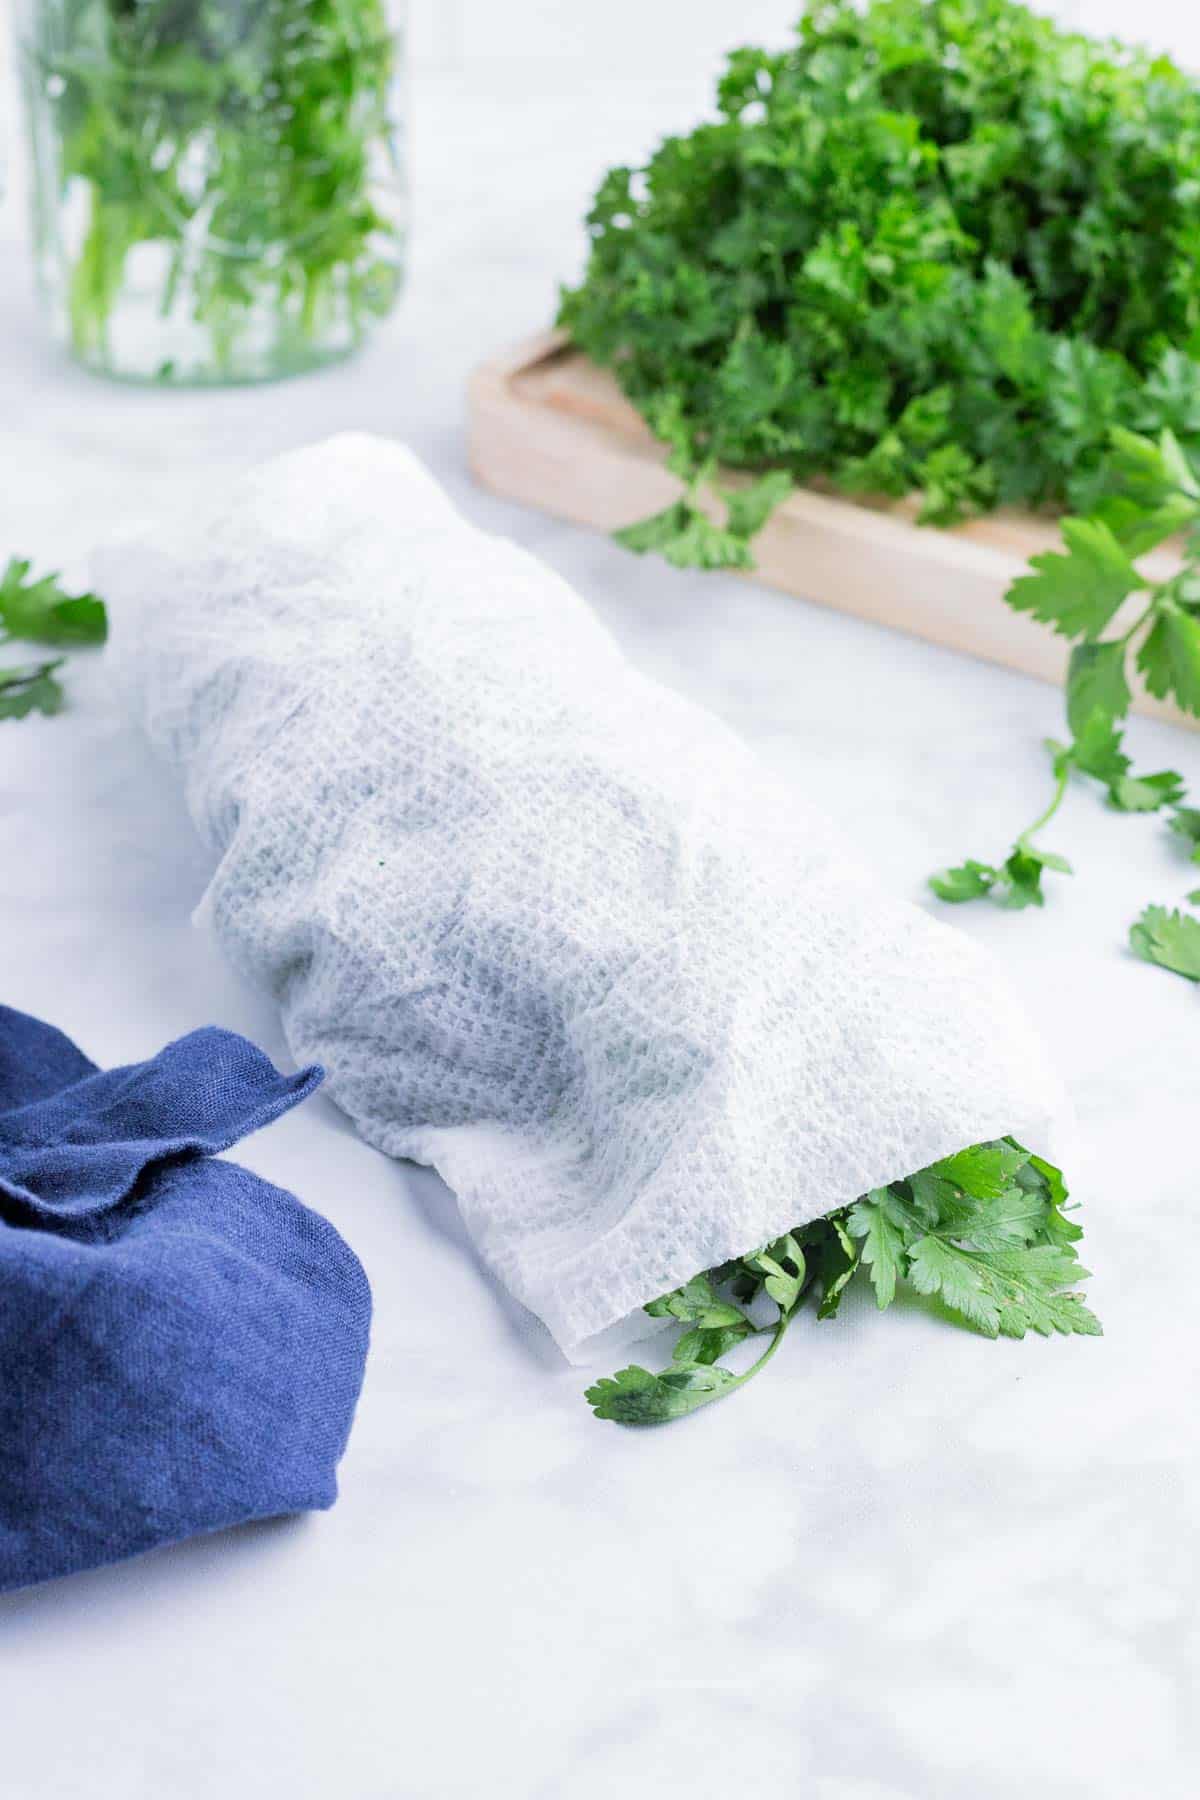 A bunch of parsley is wrapped in a damp paper towel.